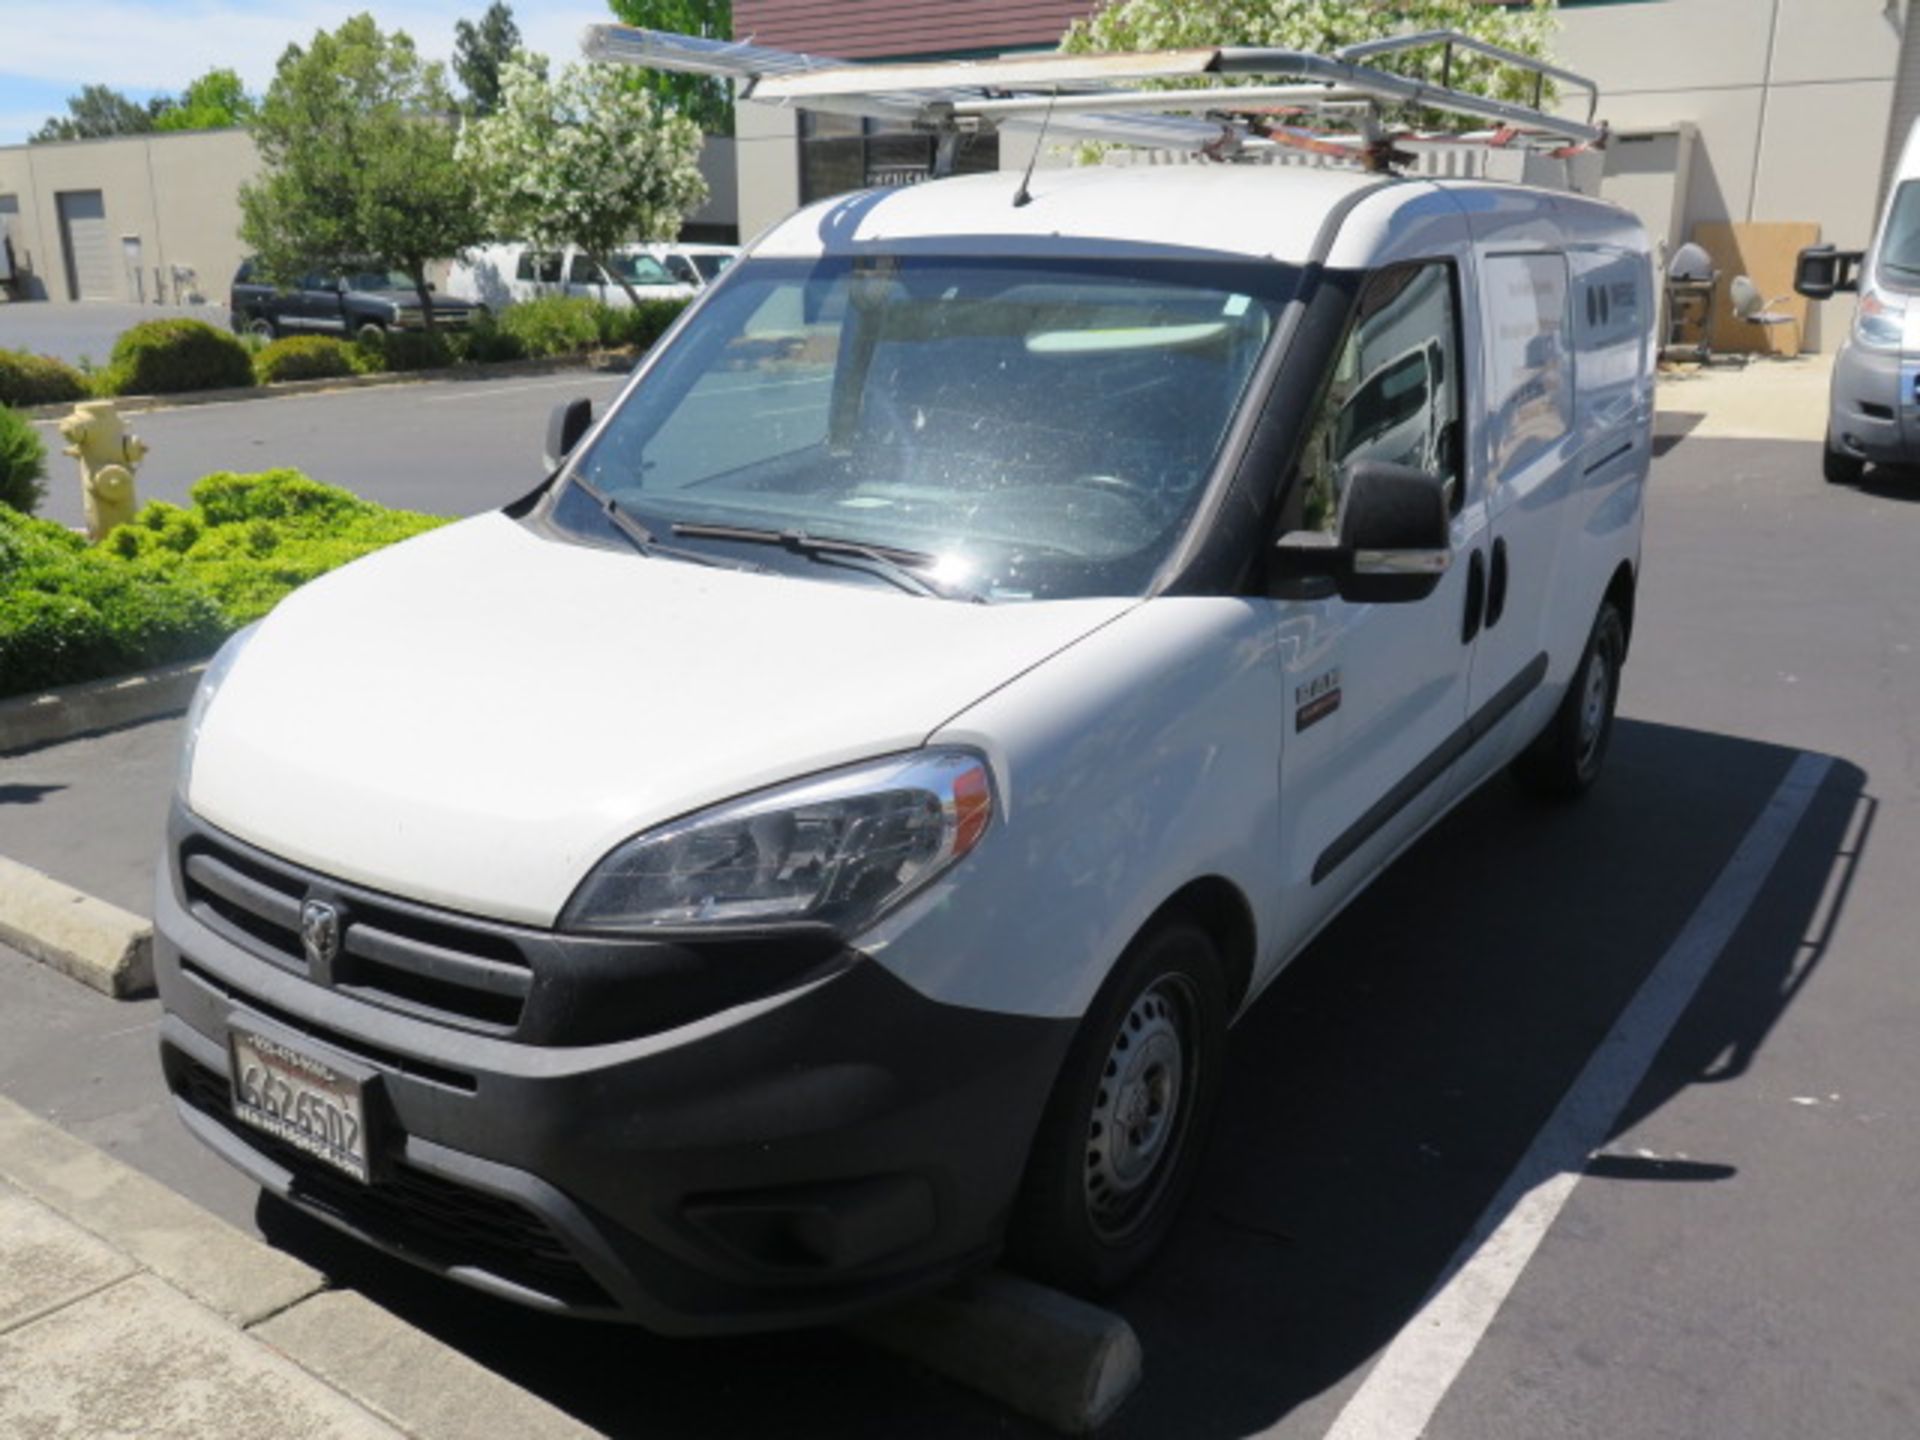 2018/2017 Dodge Ram ProMaster City Cargo Van Lisc 66265D2 Gas, Auto Trans, 64,961 Miles, SOLD AS IS - Image 2 of 21